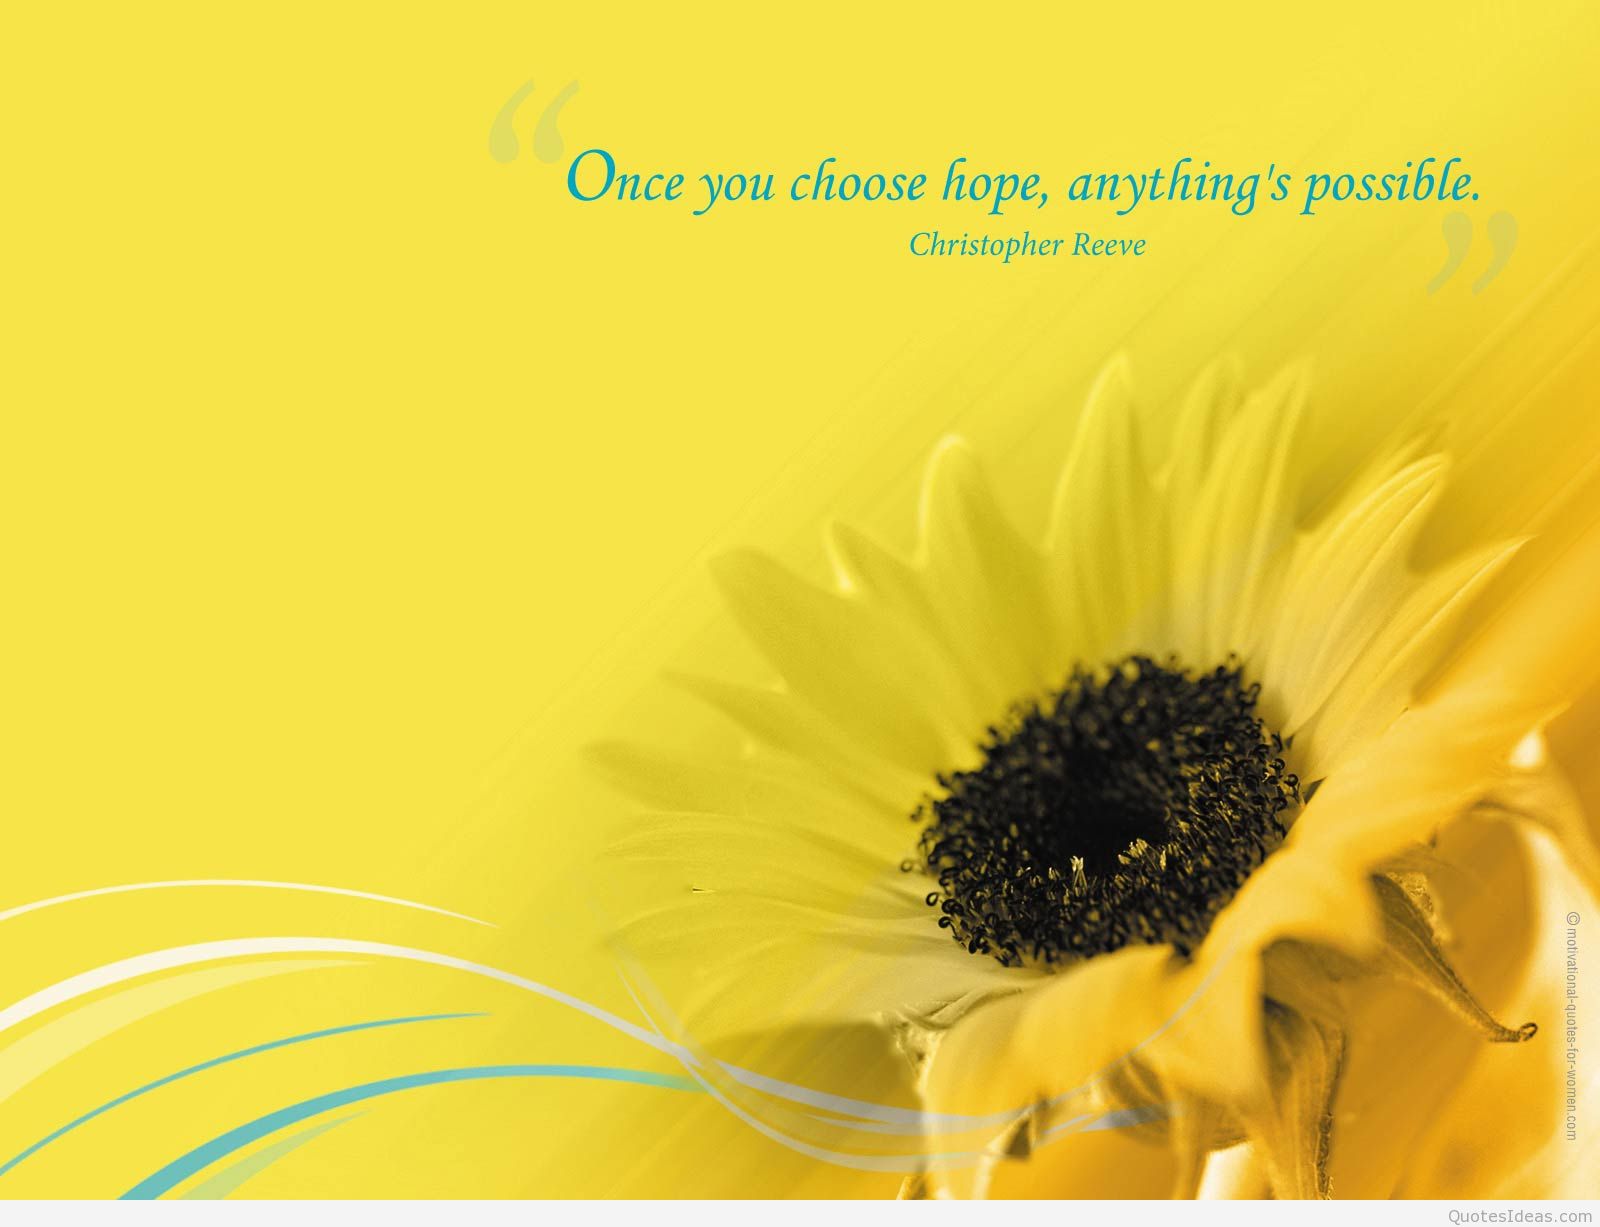 Quotes Wallpaper About Happine Xpx Border With Inspirational